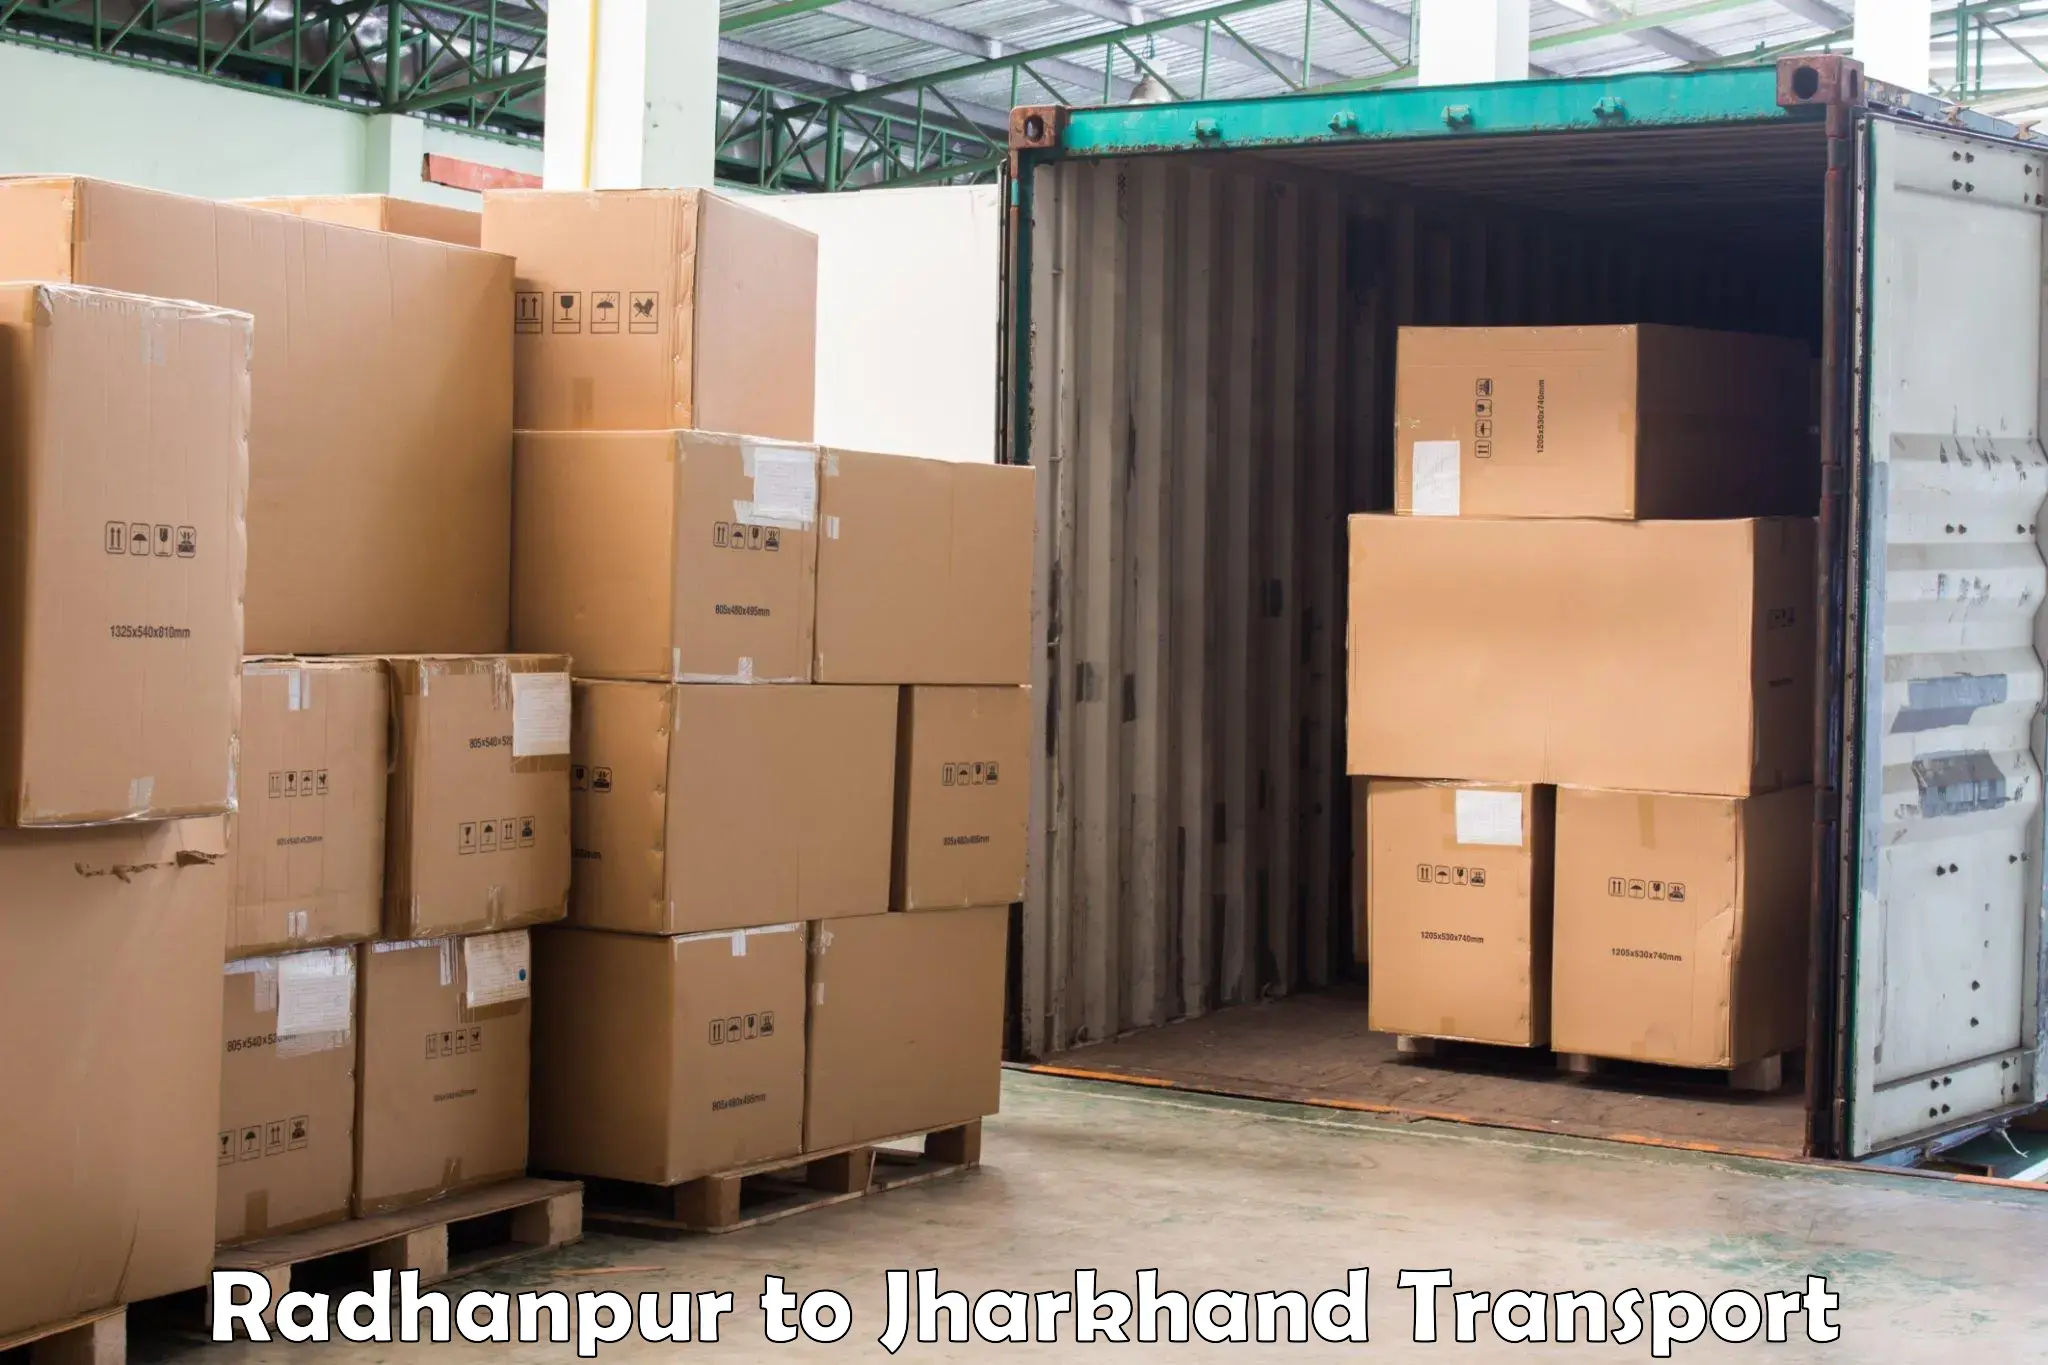 Truck transport companies in India Radhanpur to Ramgarh